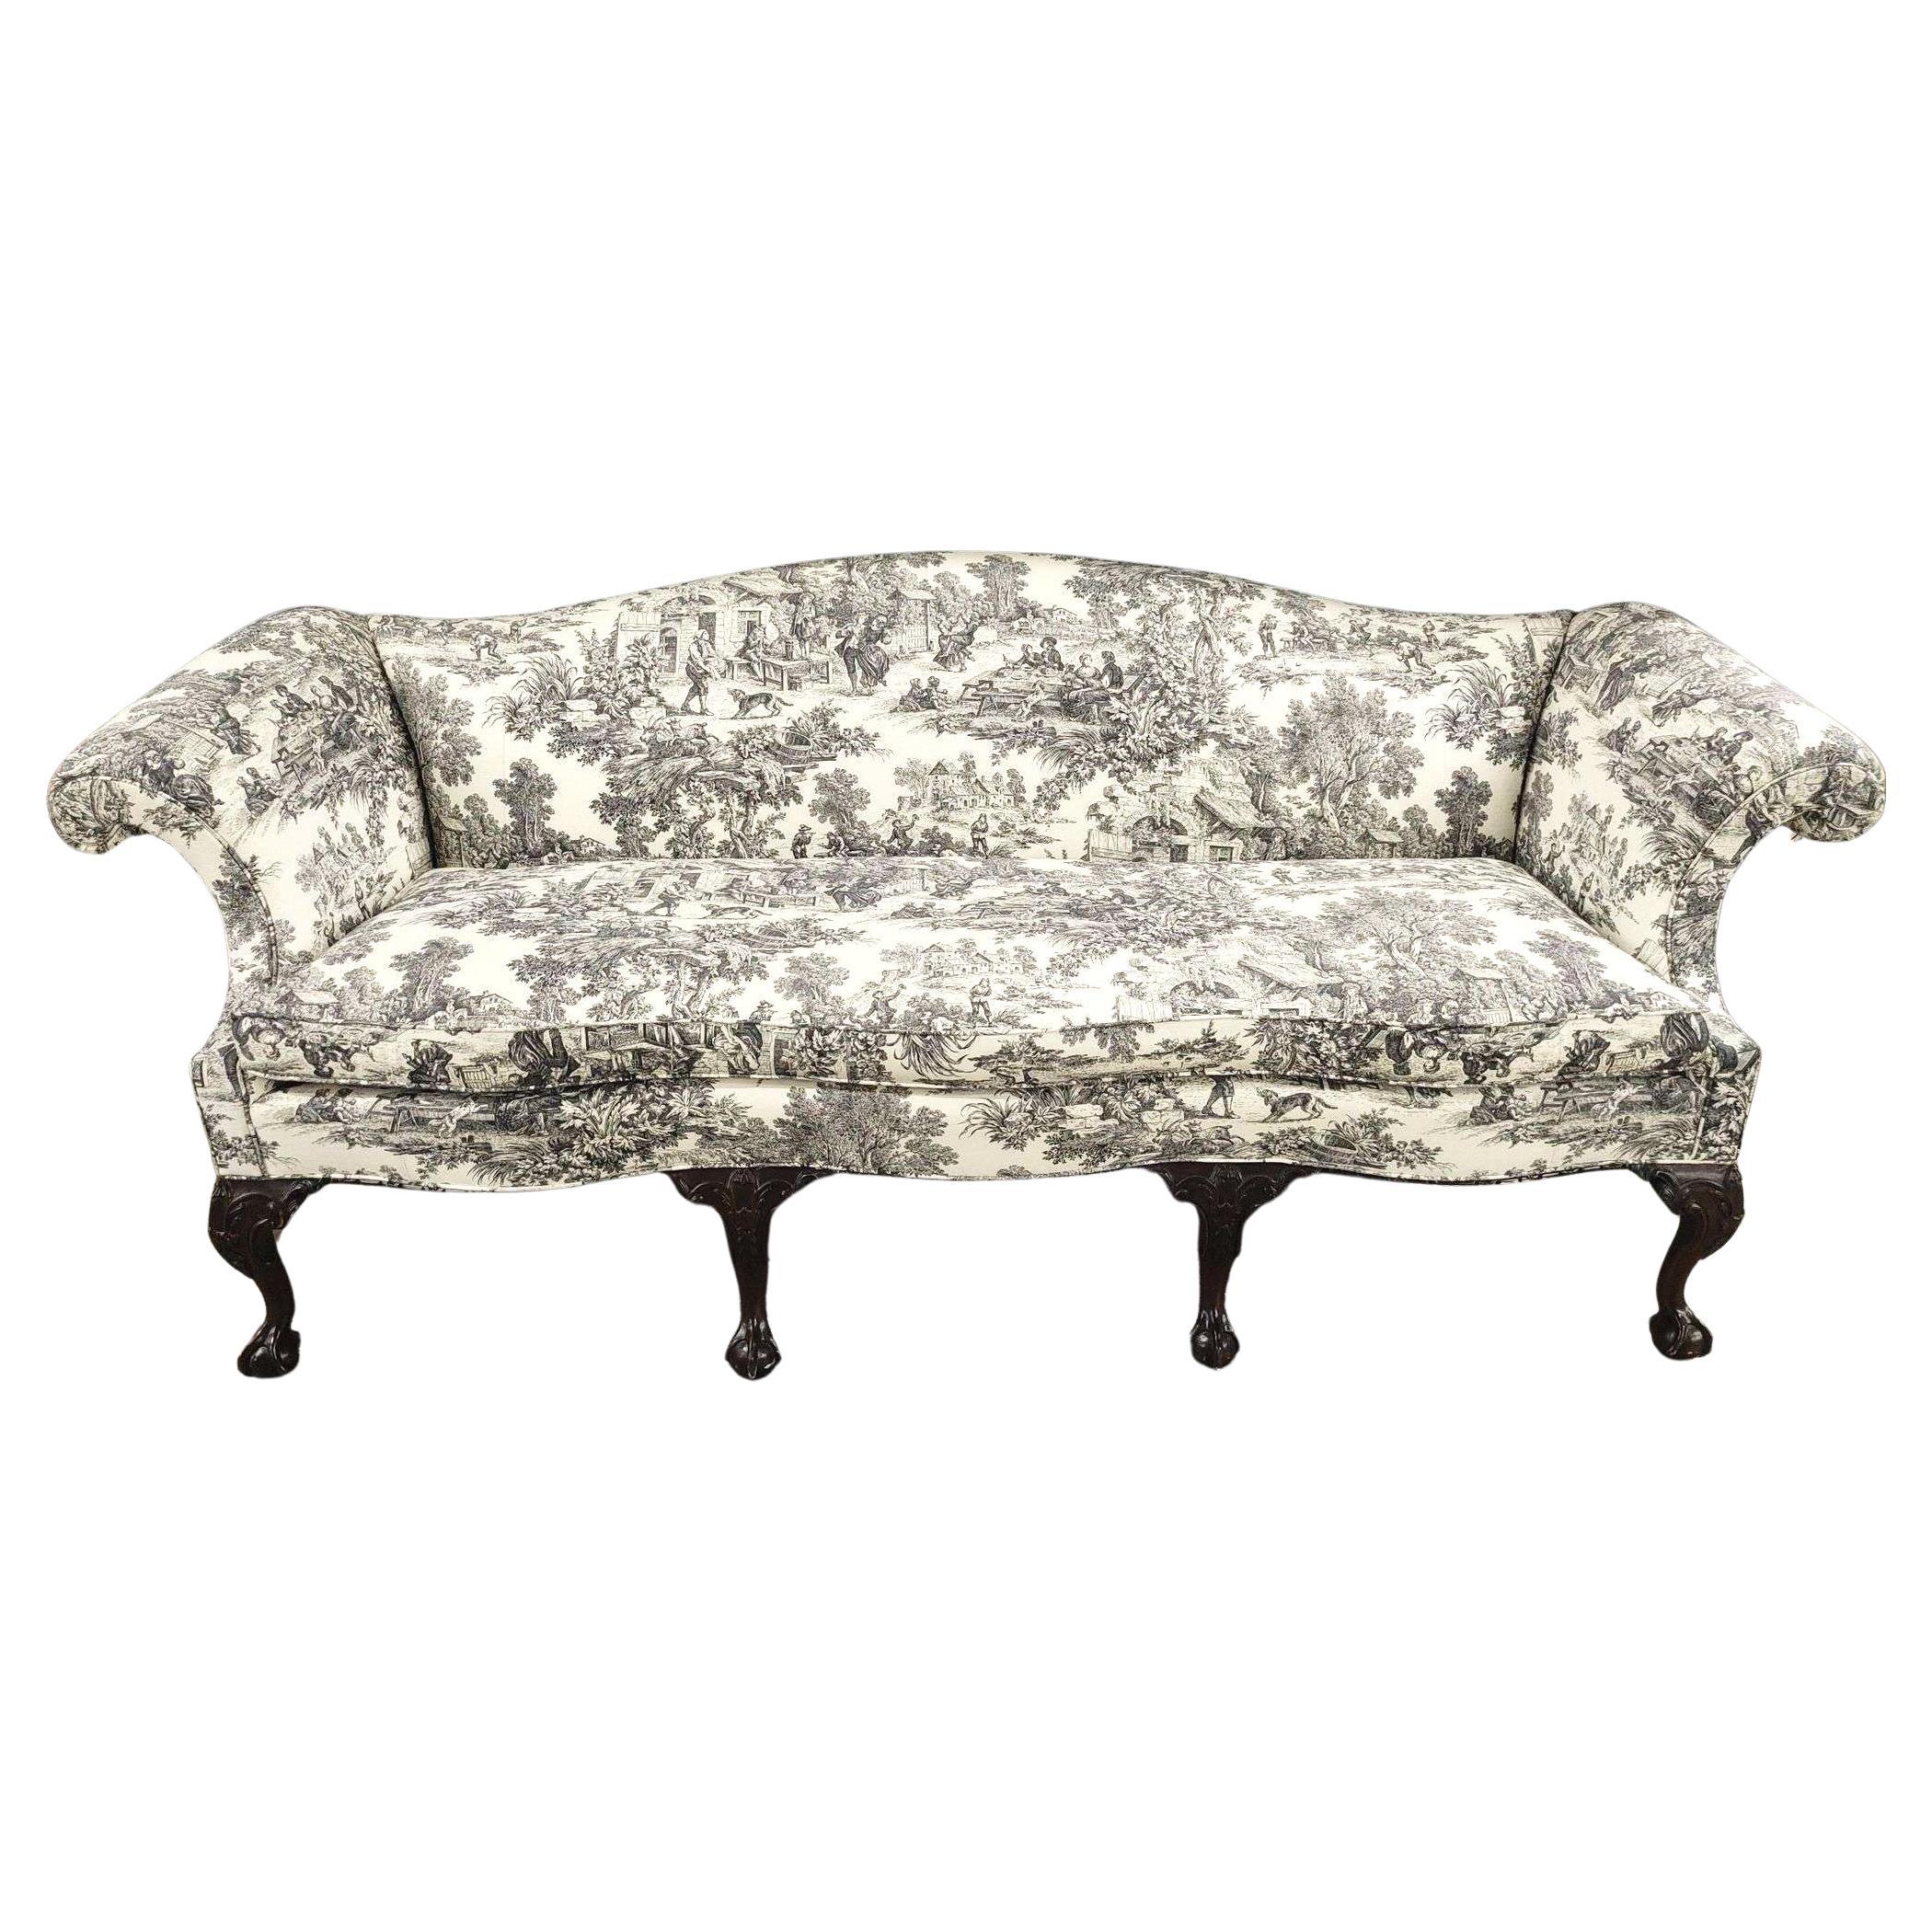 Williamsburg Chippendale Style Toile Camelback Settee Sofa by Stickley